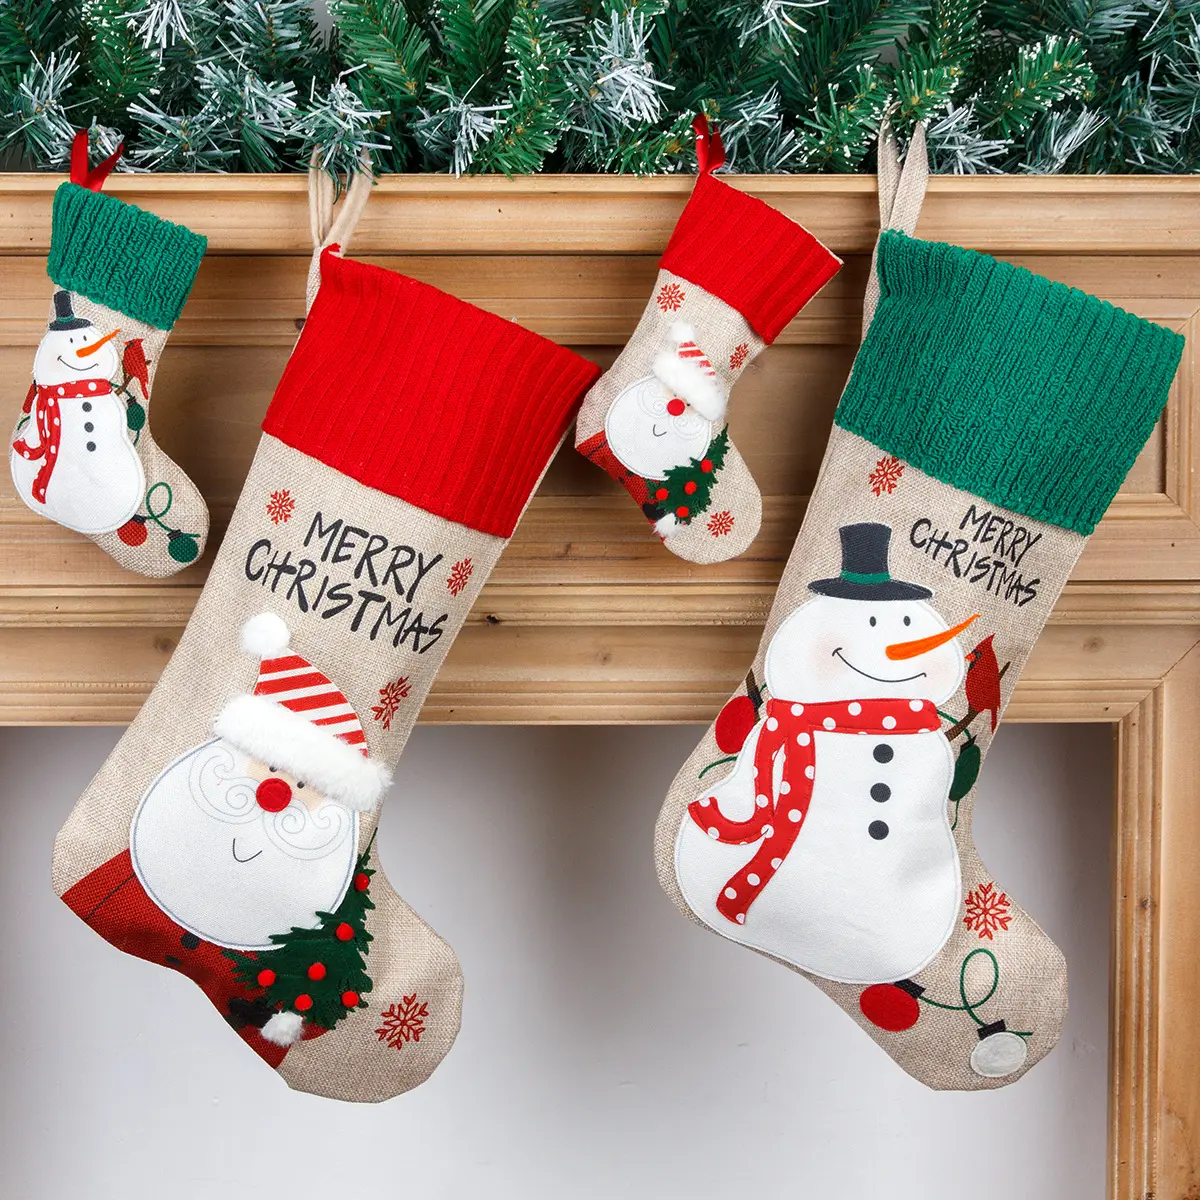 Fashion Sublimation Old Man Snowman Linen Christmas Stocking Plain Knitted Santa Claus Stocking For Home Party Decoration